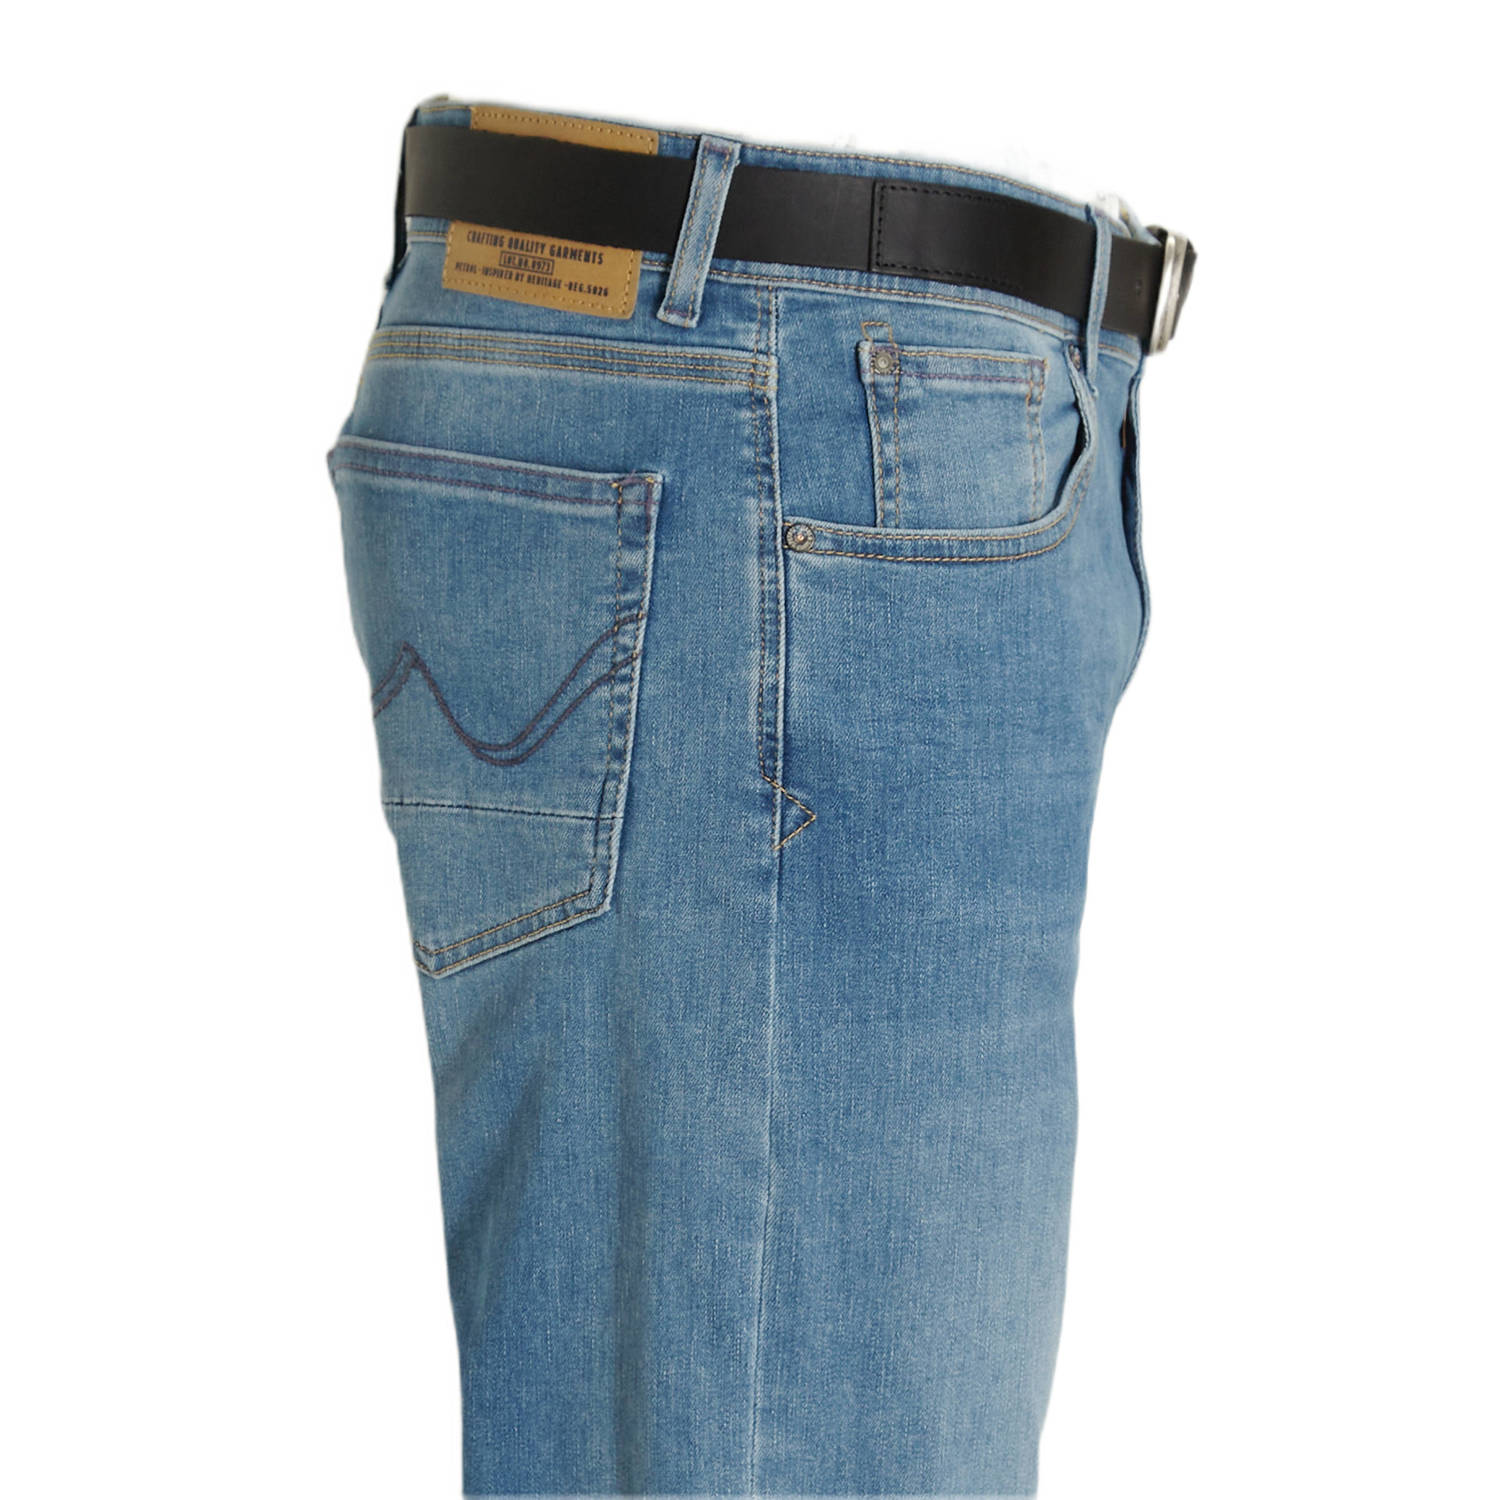 Petrol Industries tapered fit jeans RUSSEL-CLASSIC light stone